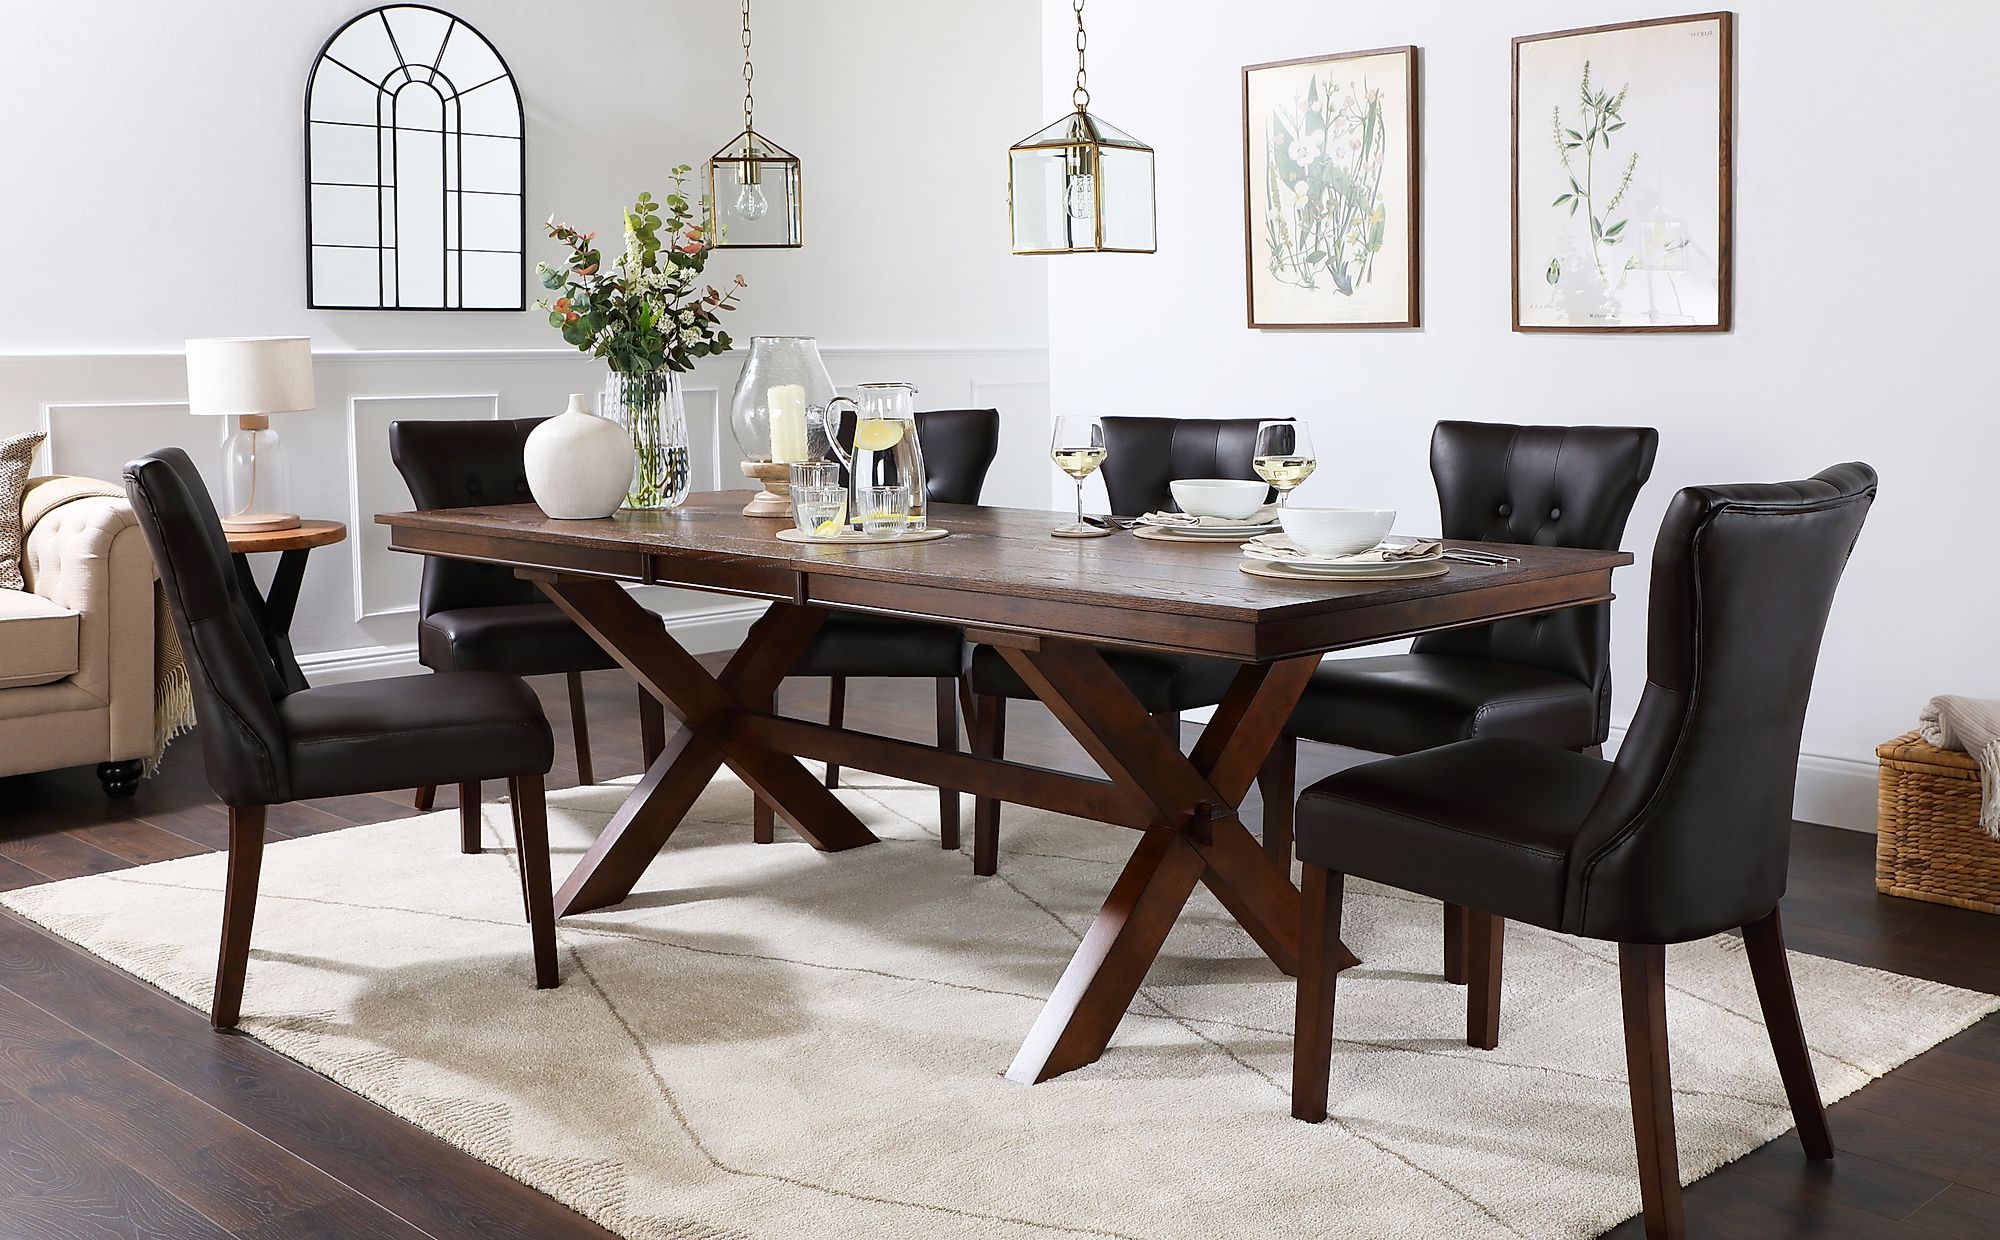 Dining Room Table With Leather Chairs